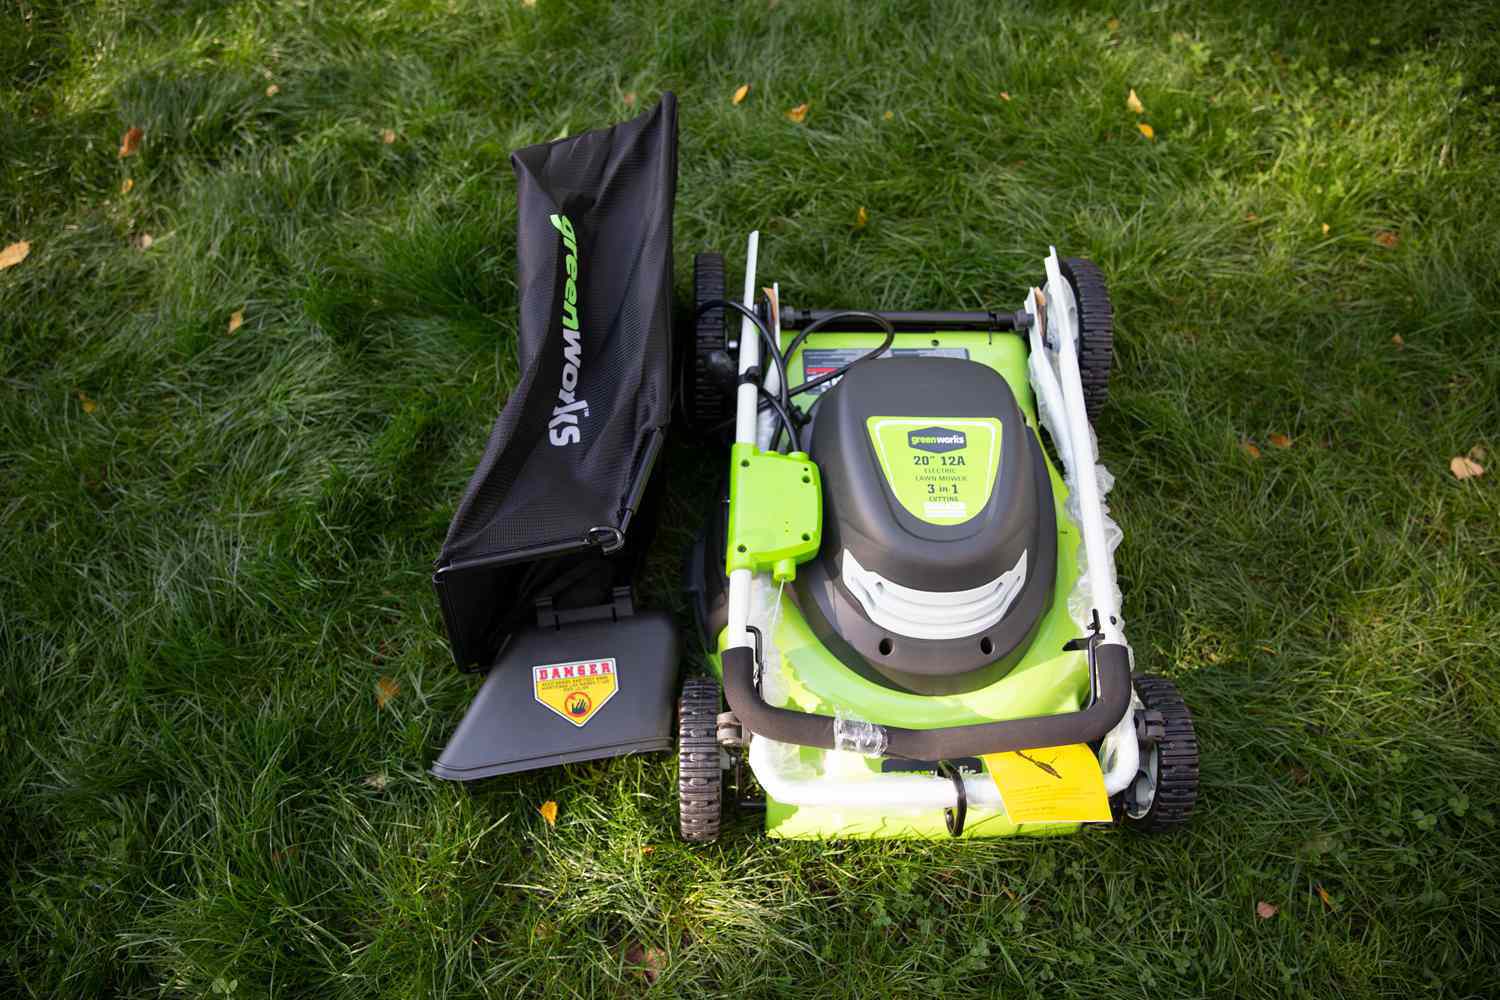 Greenworks 25022 12-Amp 20-Inch 3-in-1 Electric Corded Lawn Mower